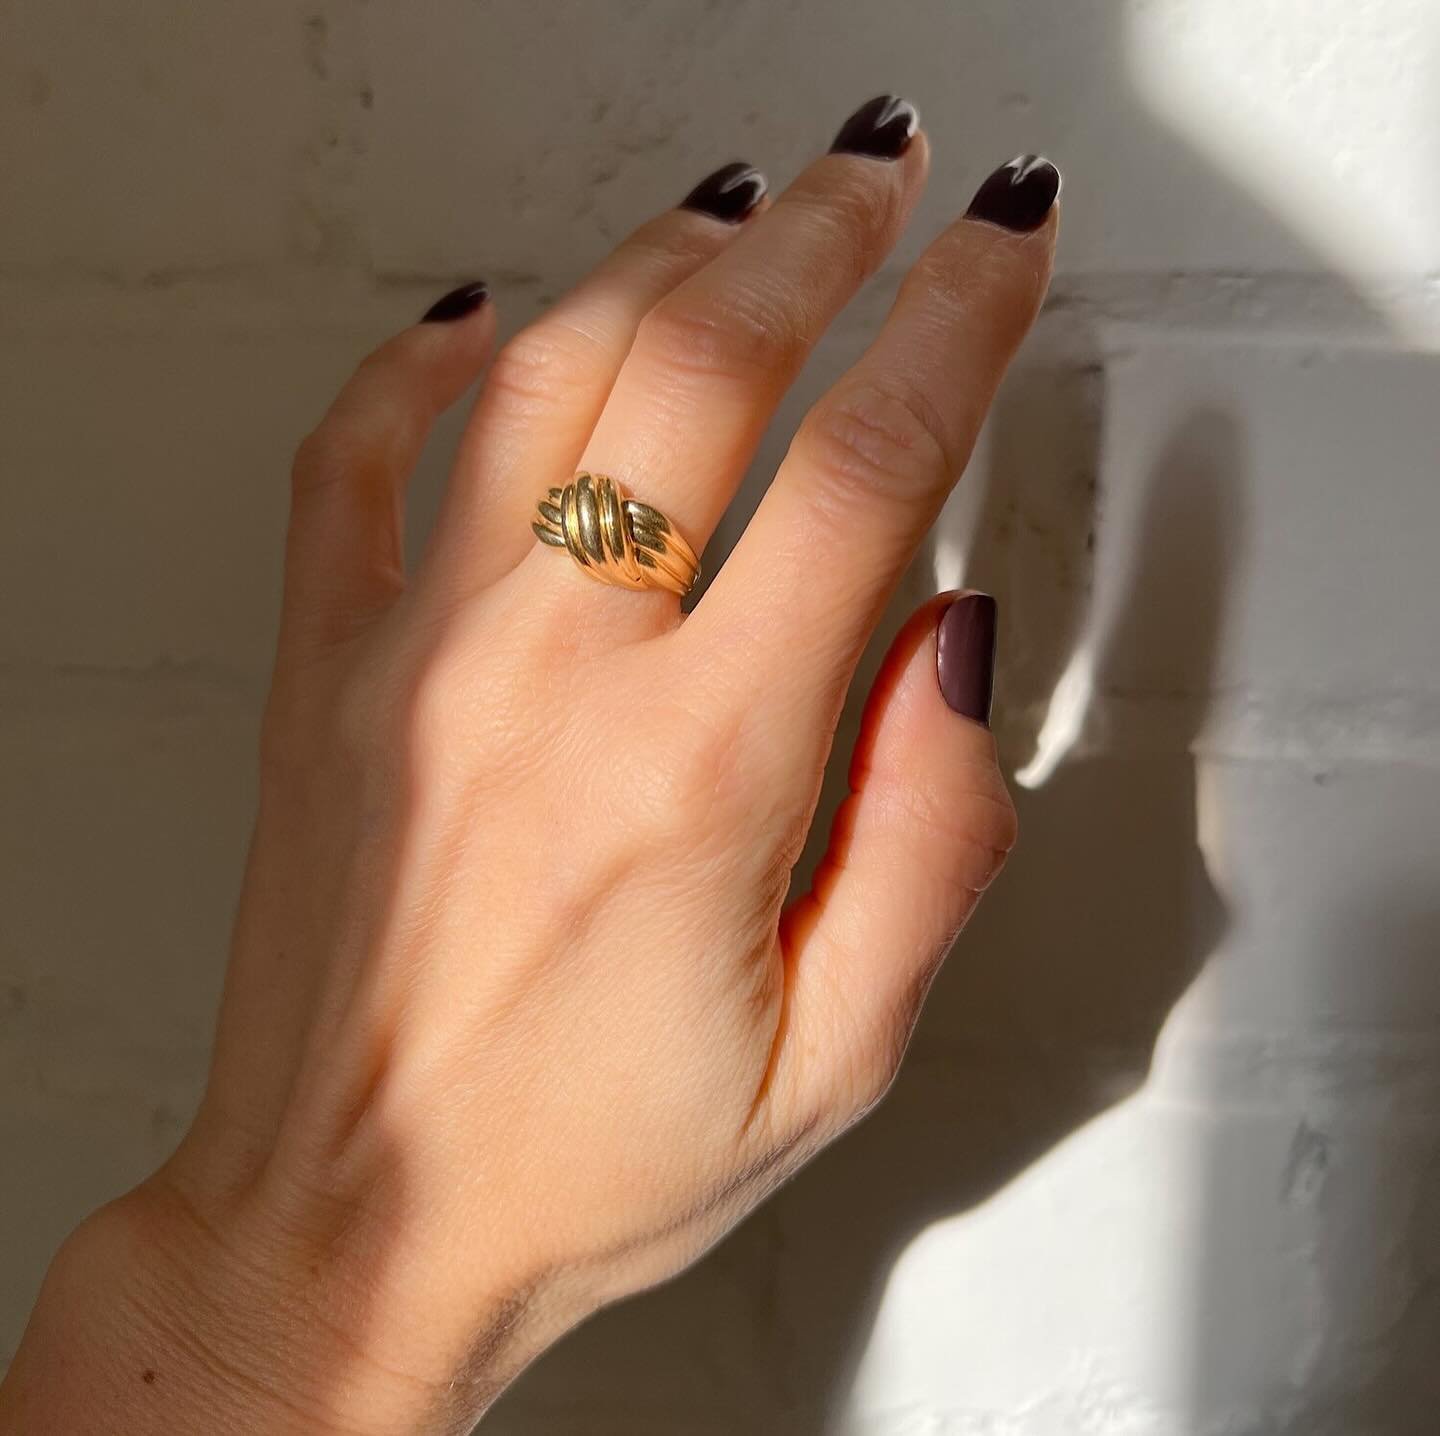 We&rsquo;ve got some really special vintage sterling and 14k gold estate jewelry online and in the cases at our @cityfoundrystl shop! Do you prefer silver, gold, or do you live on the wild side and mix your metals? ✨